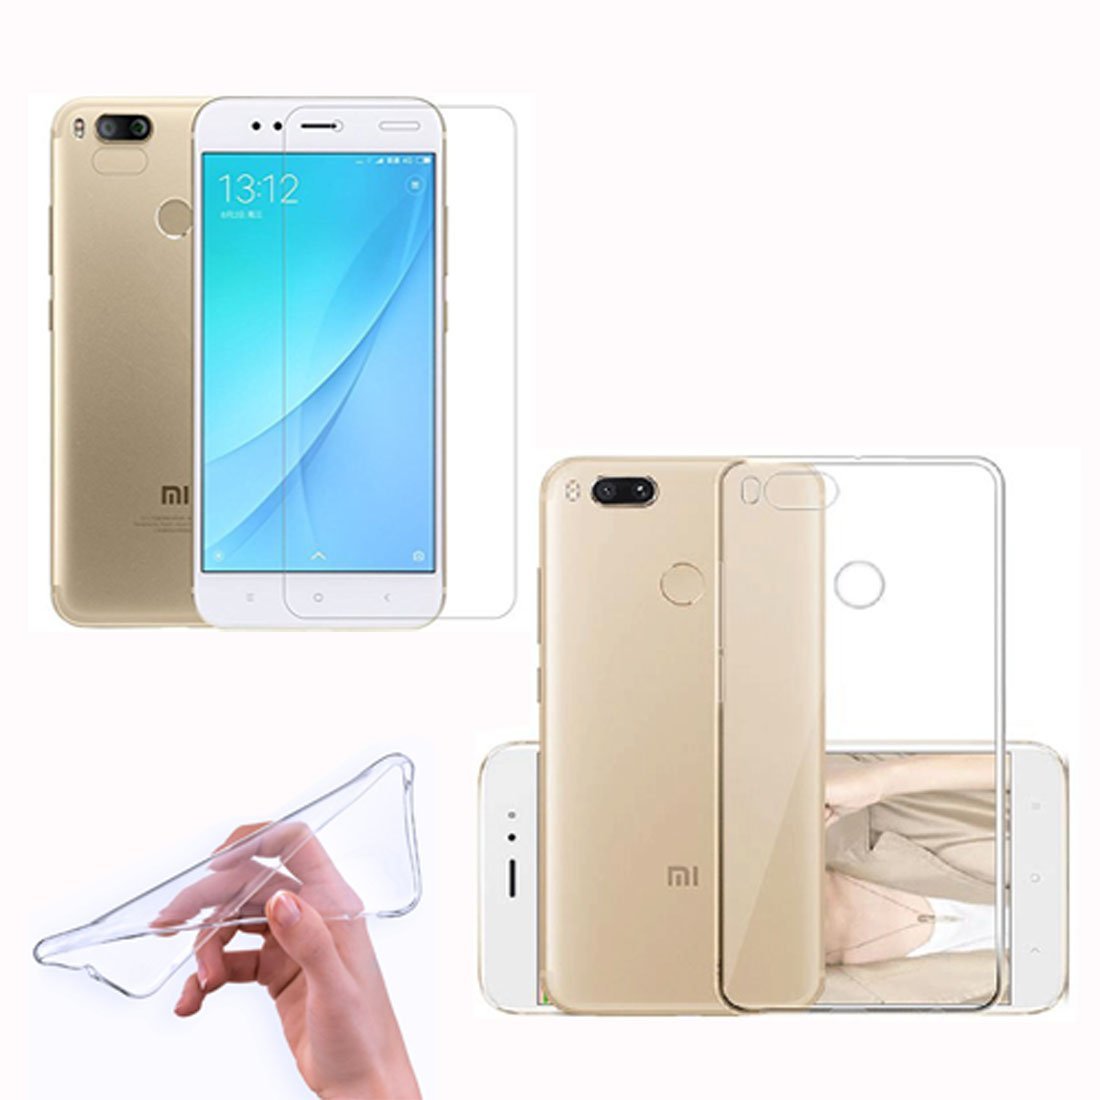 Xiaomi Mi A1 Back-Cover and Temperered Screen Protector at Rs 99 (Combo)